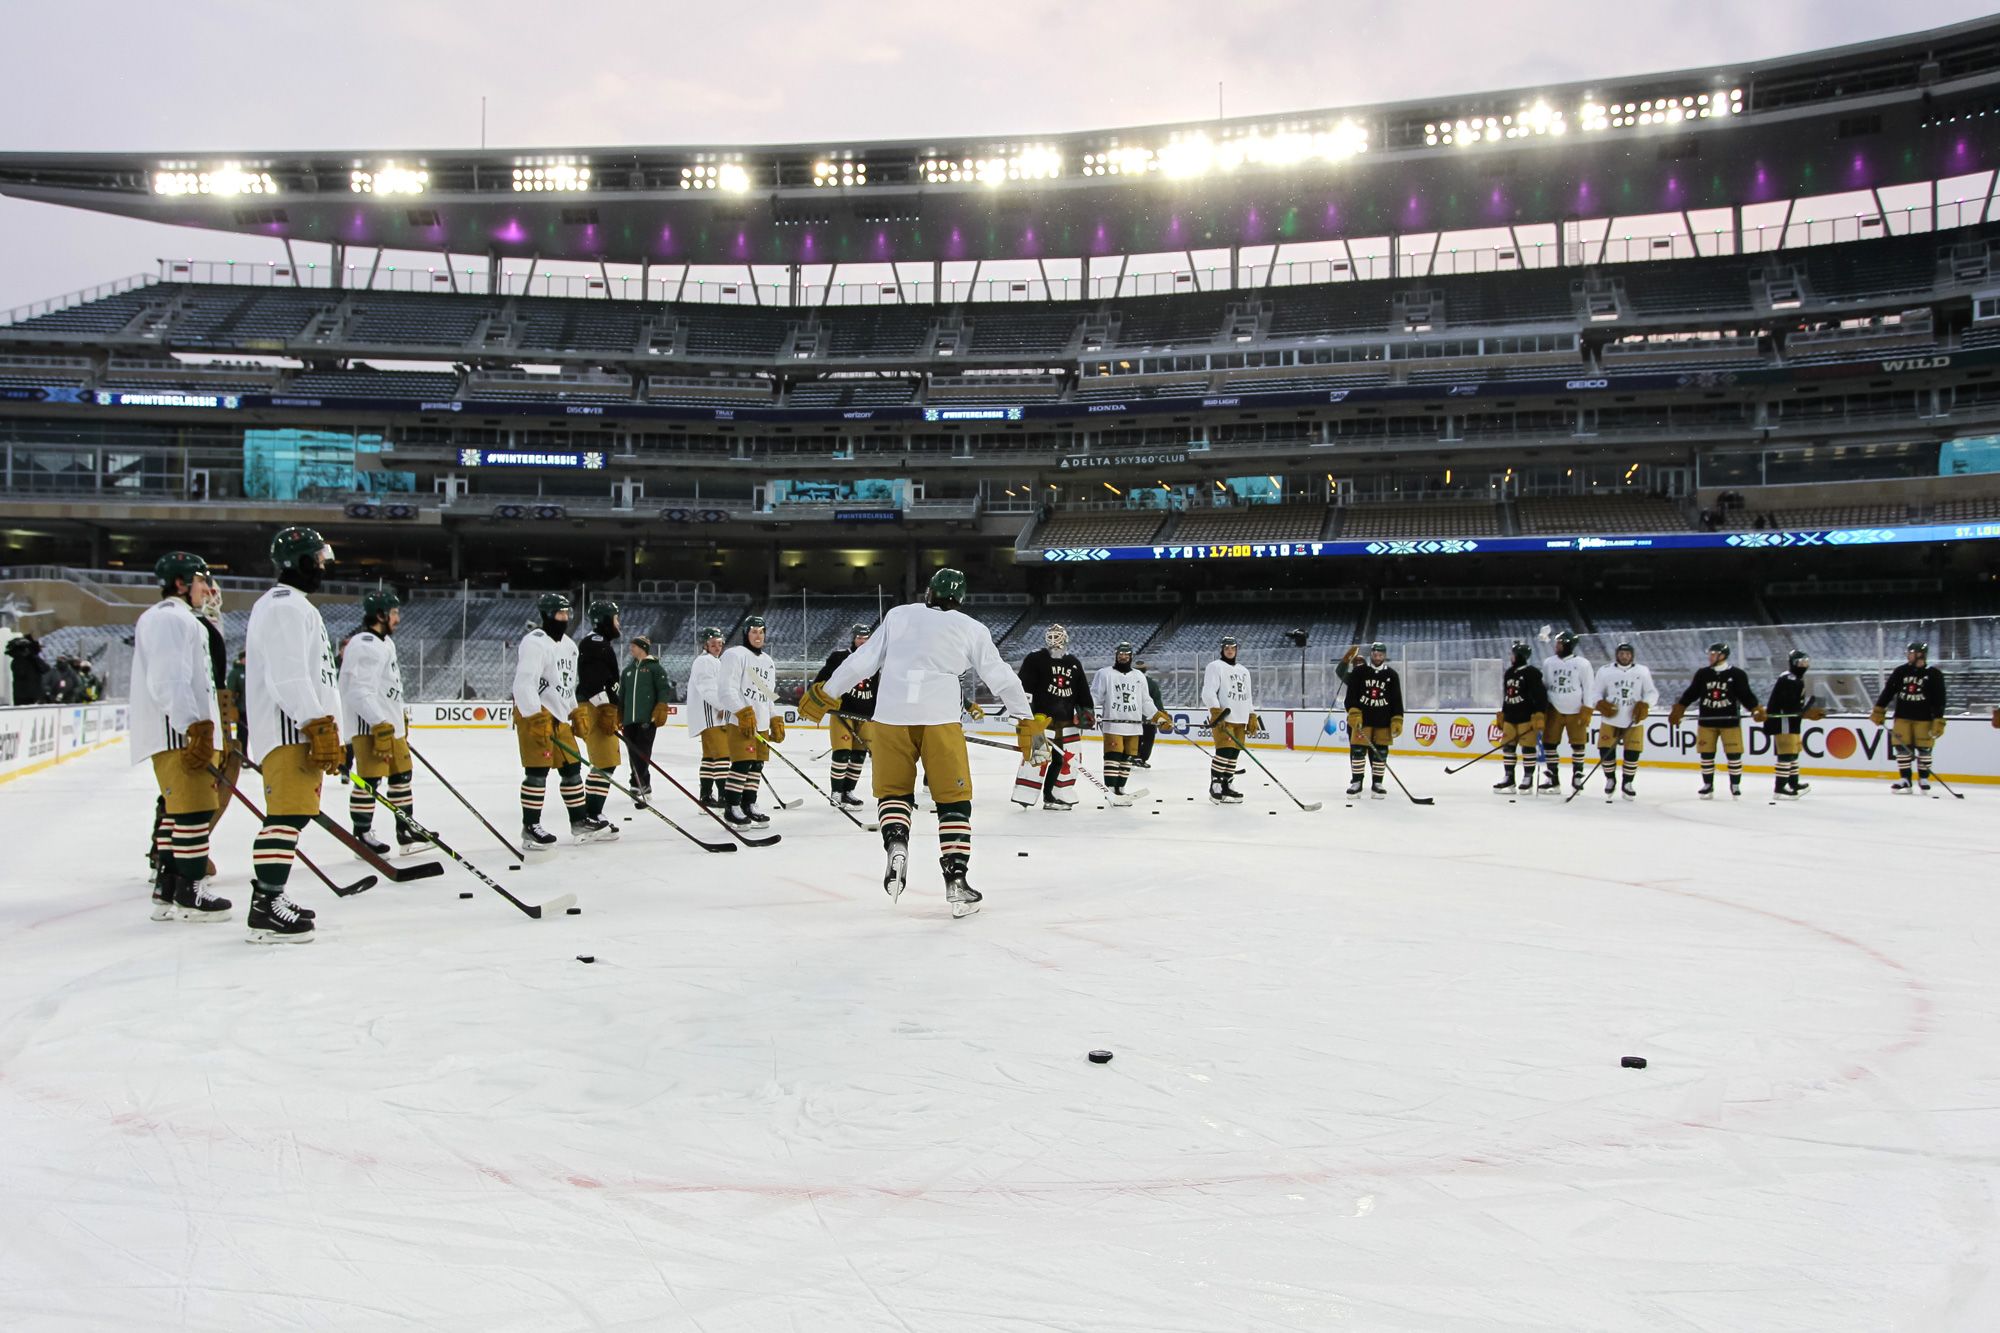 Wild-Blues Winter Classic could be one of coldest outdoor games in